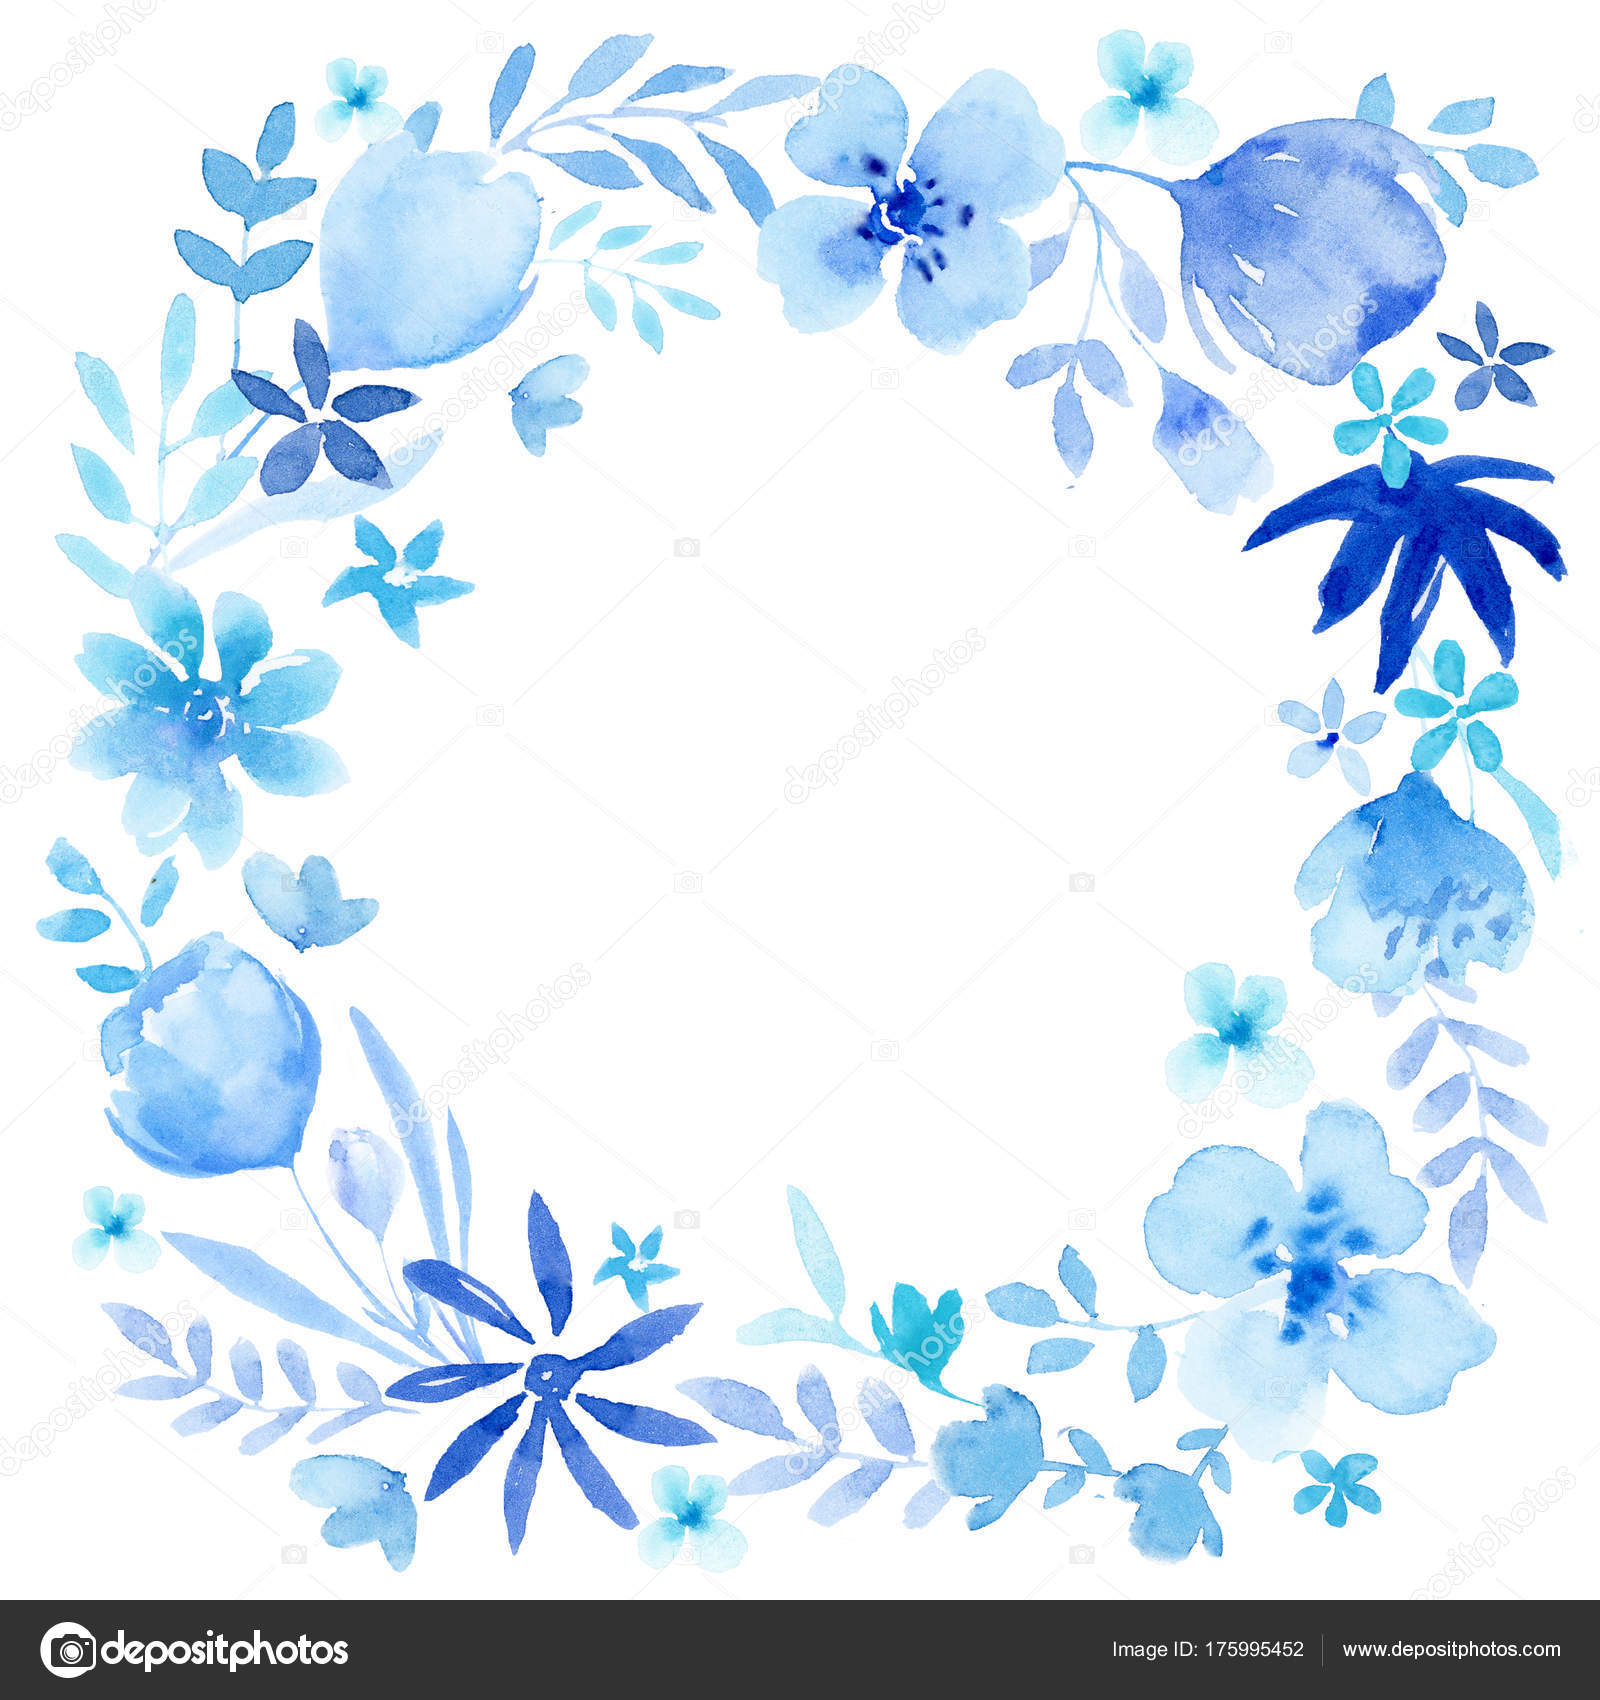 Watercolor blue floral background — Stock Photo © yaskii #175995452